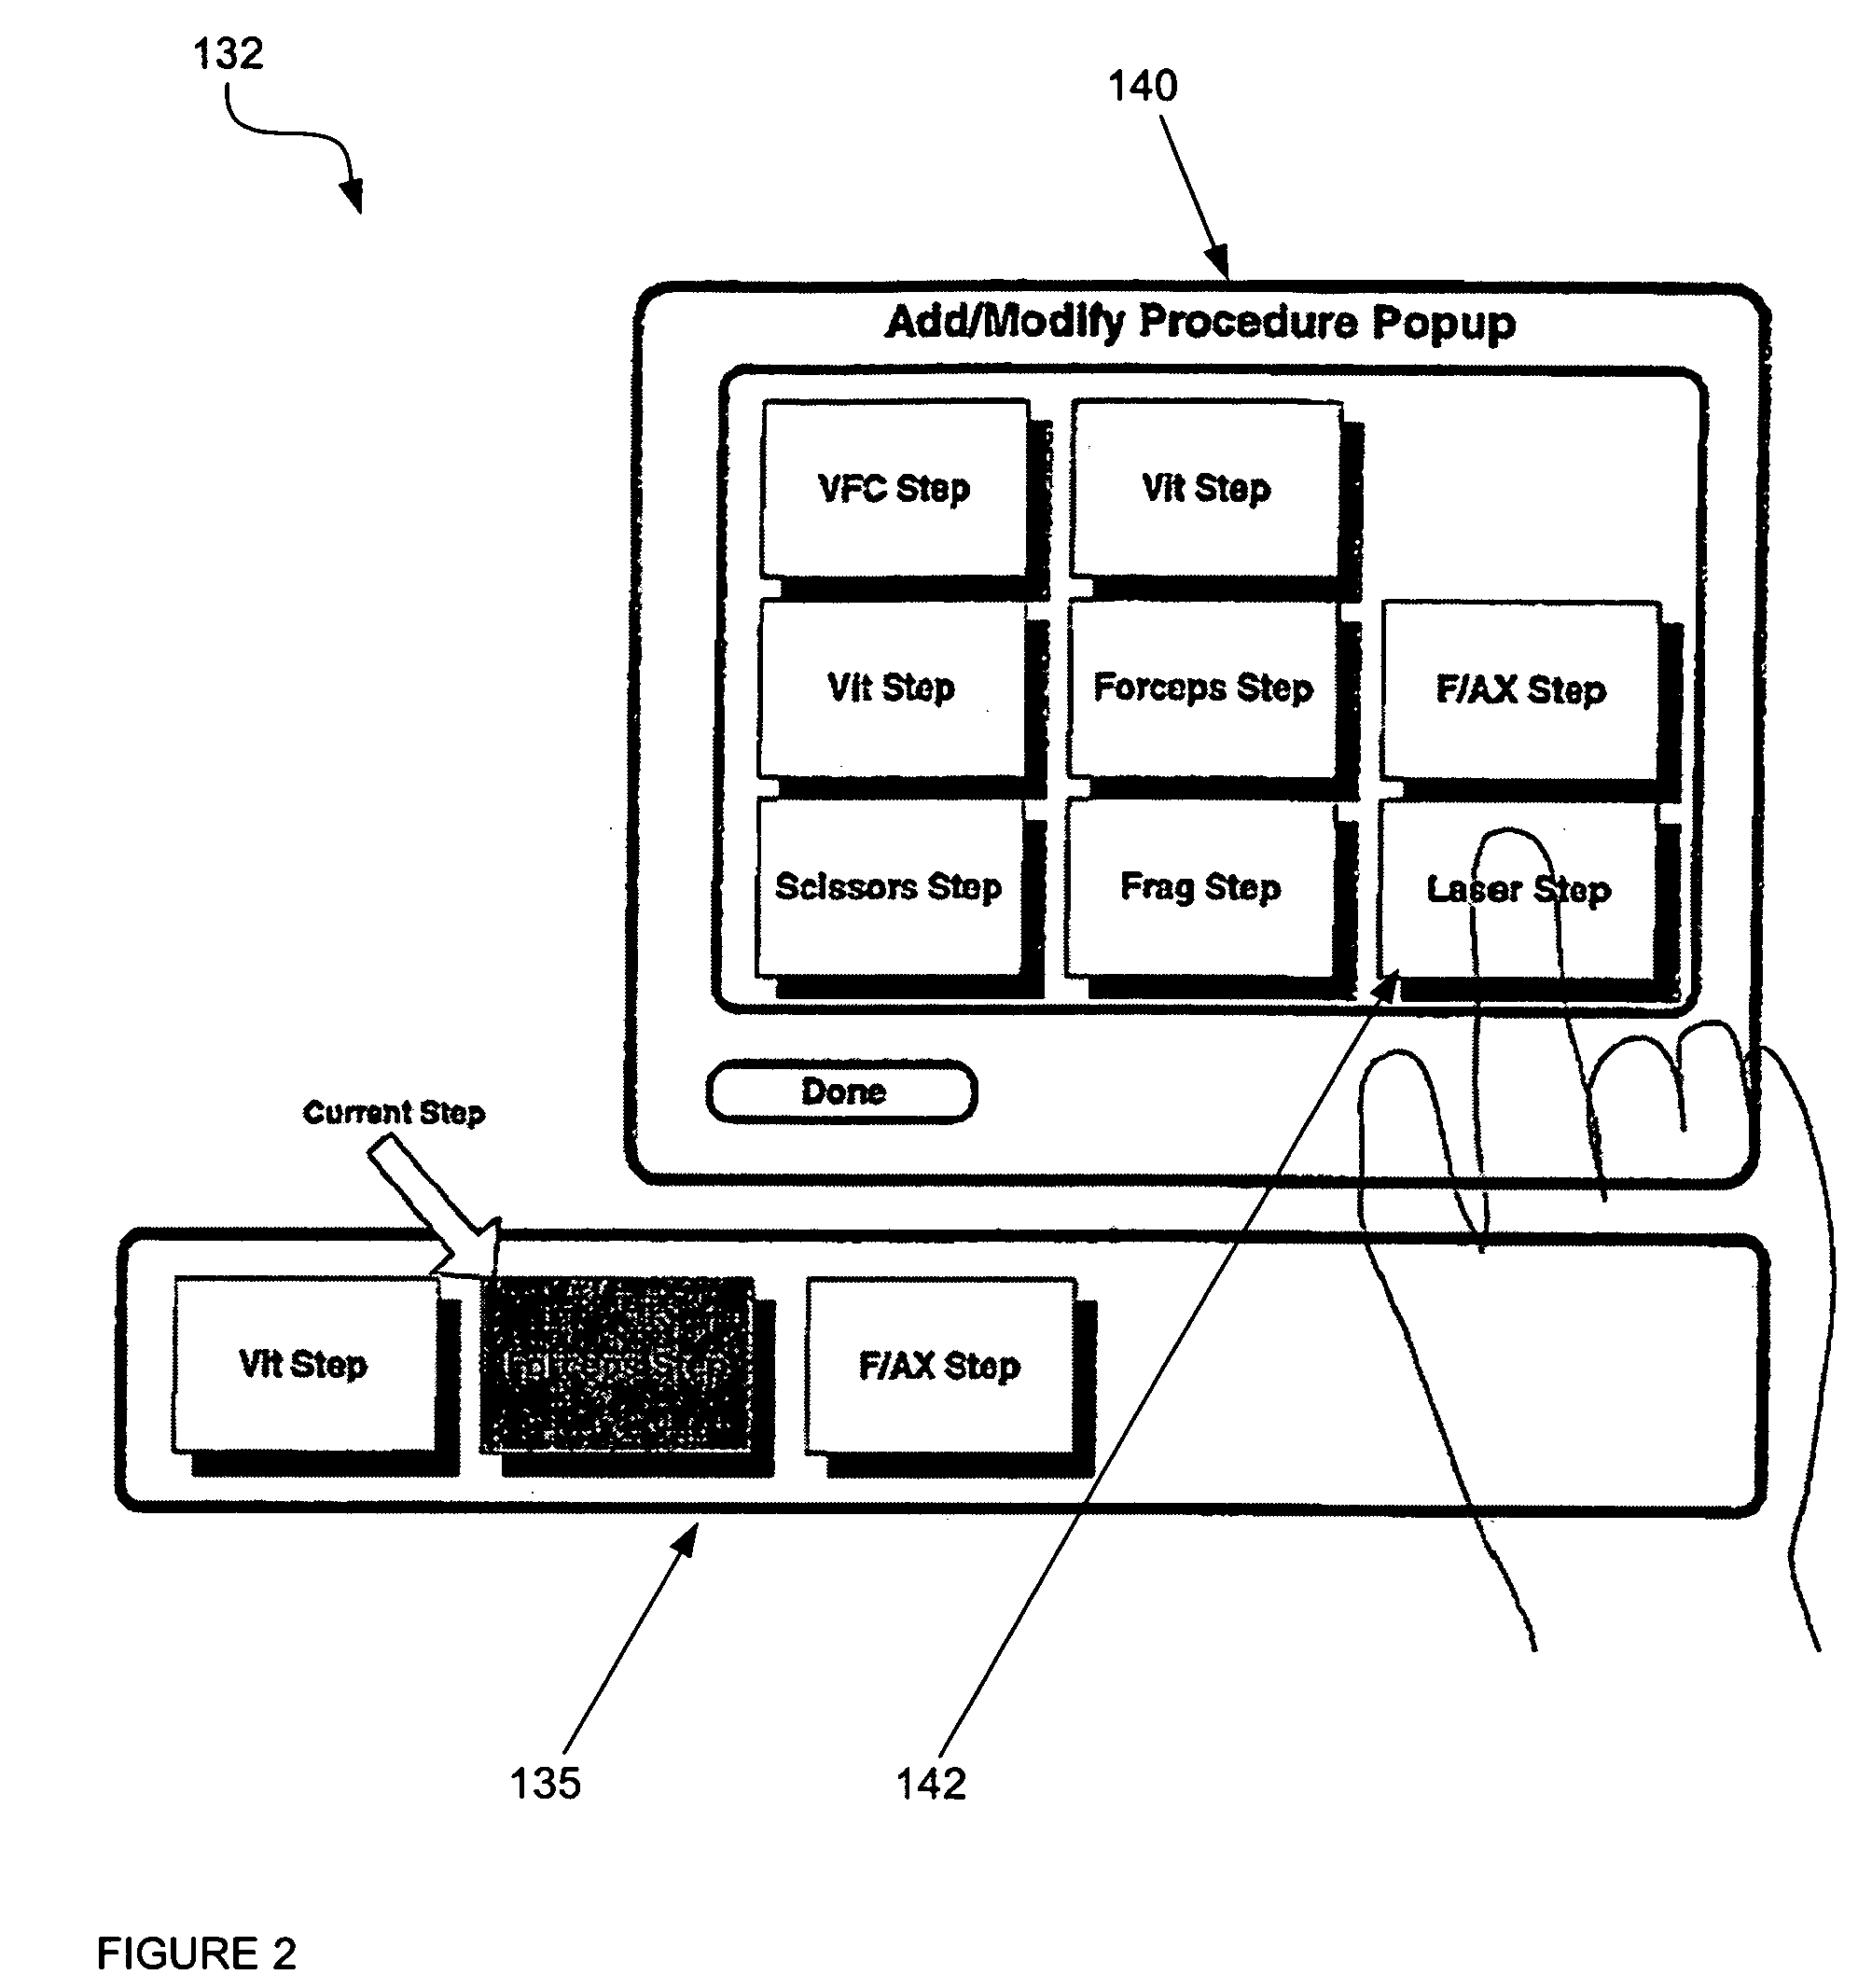 System and method for the modification of surgical procedures using a graphical drag and drop interface